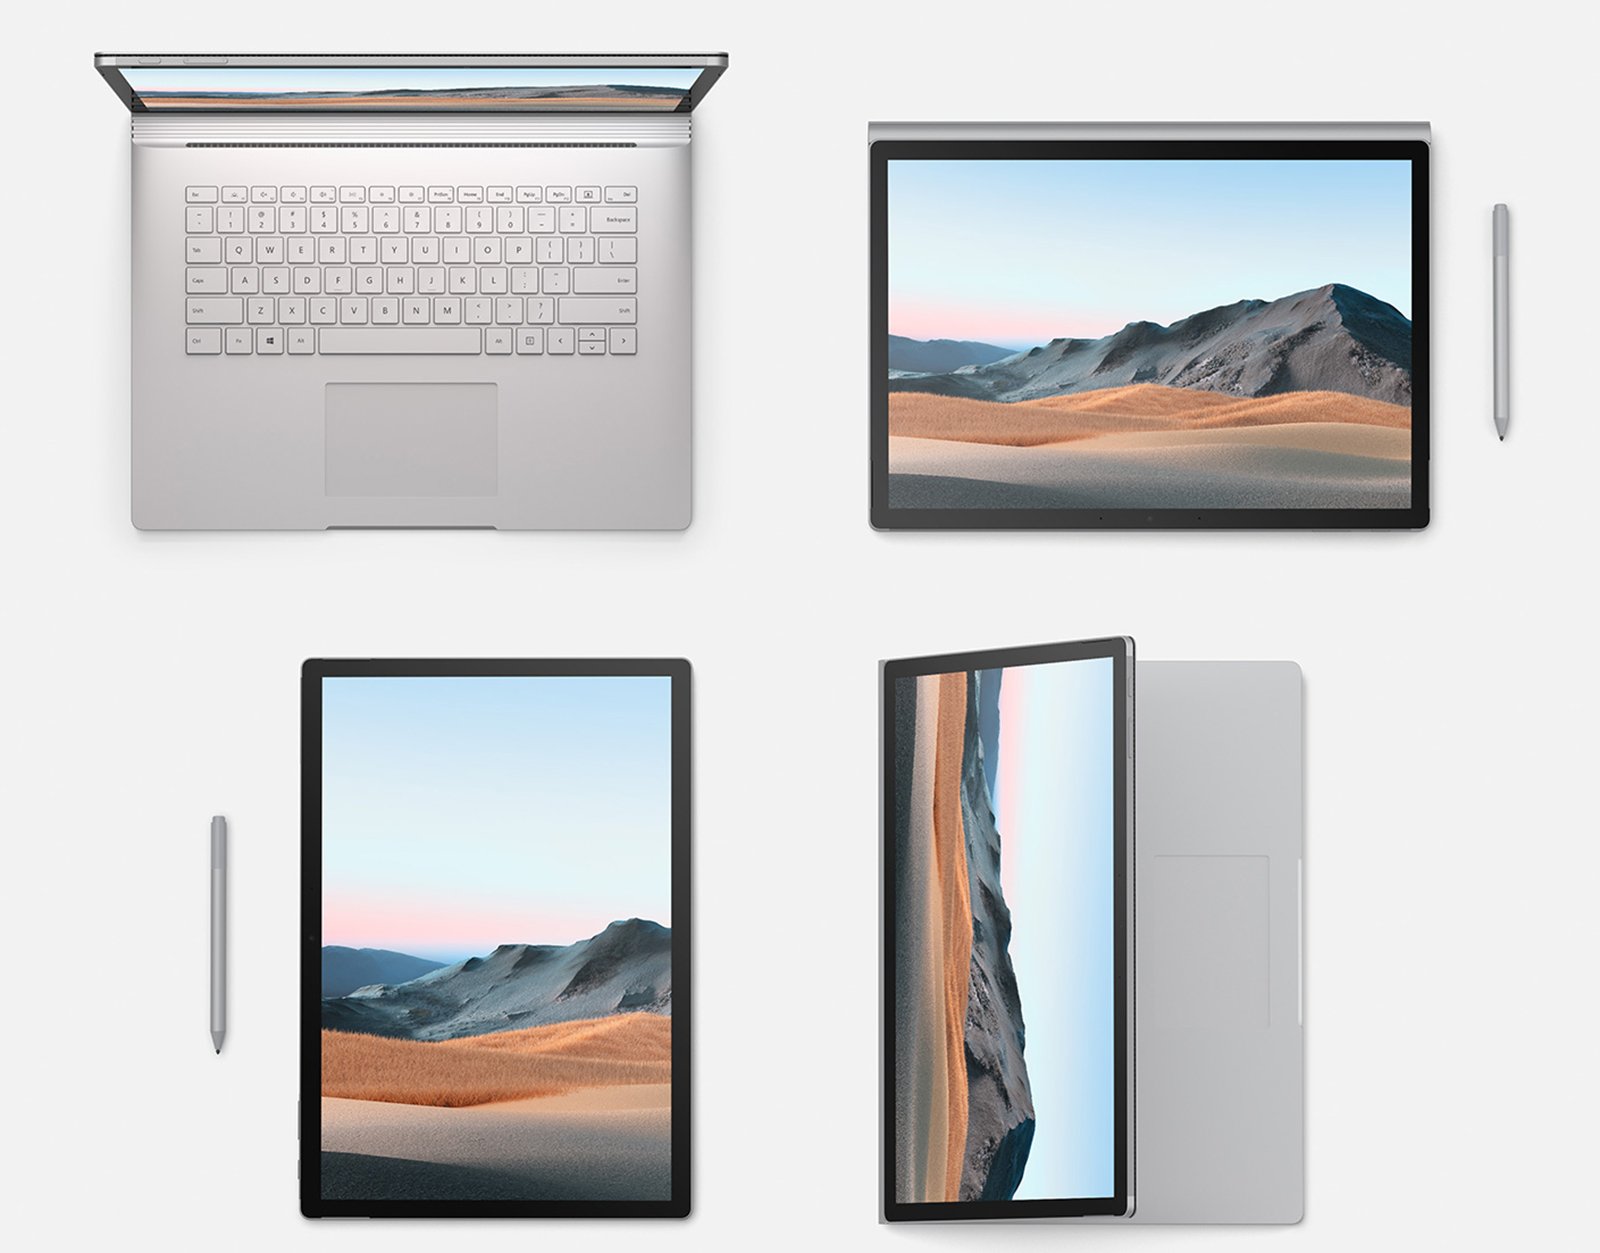 microsoft surface book 3 review